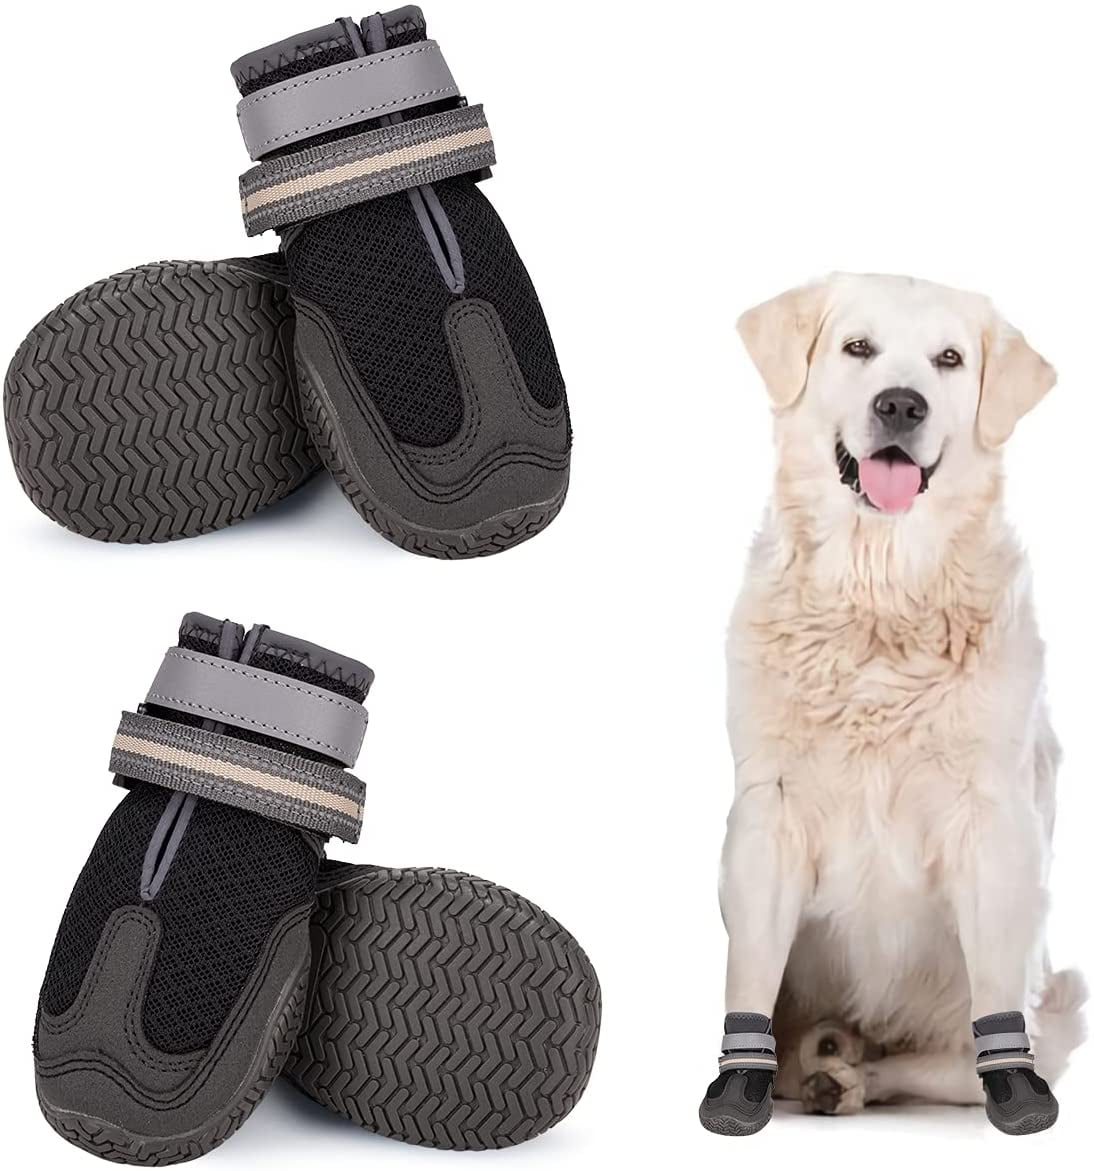 Warm Dog Winter Snow Boots Waterproof Dog Booties with Reflective Strap Anti Slip Rubber Sole Comfortable Dog Hiking Boots Walking Jogging Indoor Outdoor Dog Shoes for Large Medium Dogs 